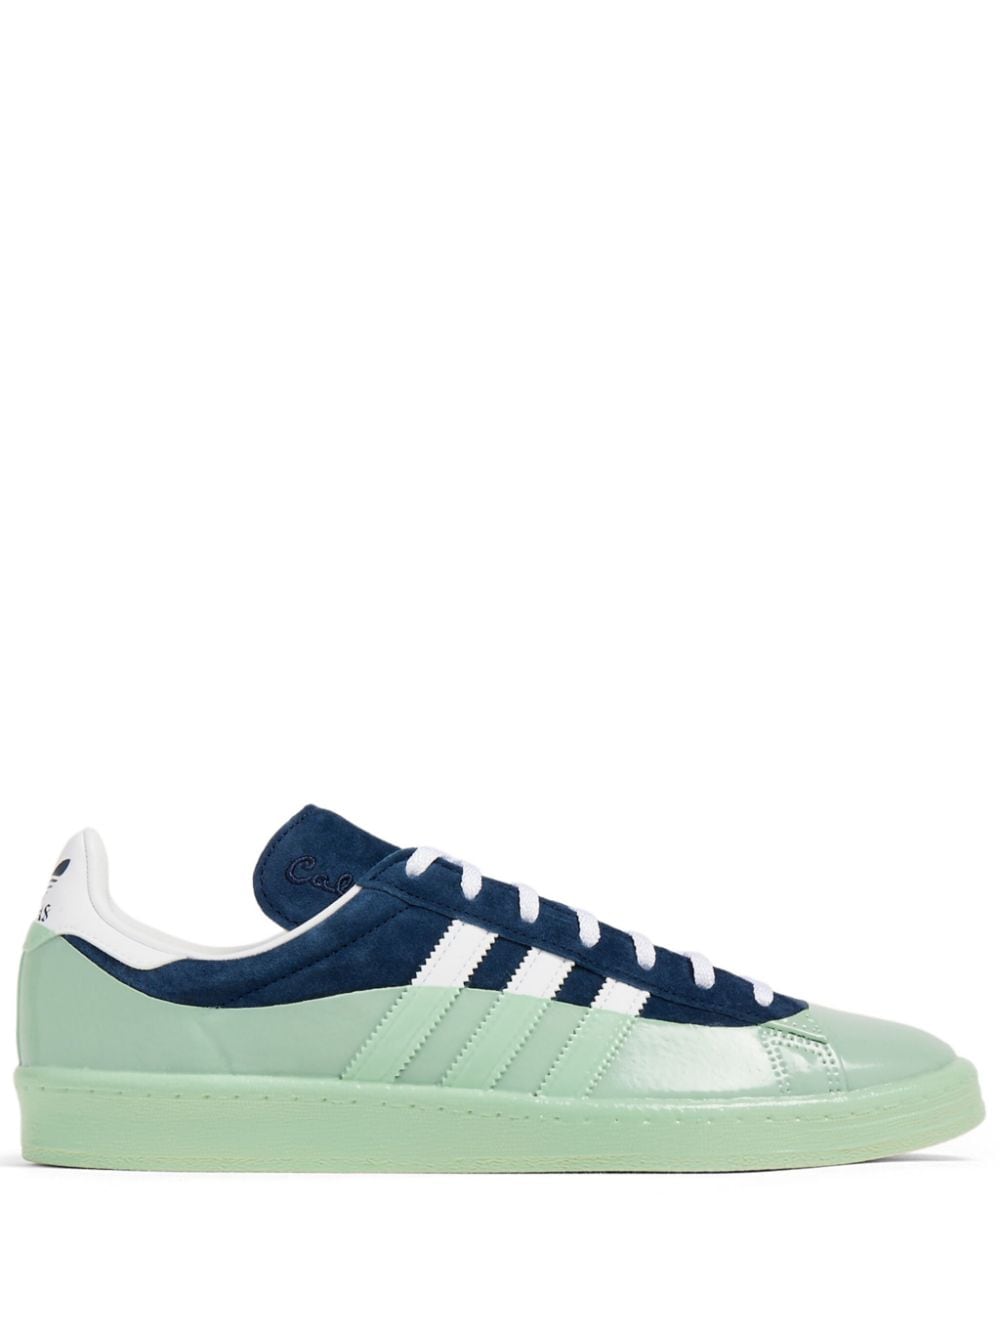 adidas colour-block lace-up sneakers - Green von adidas